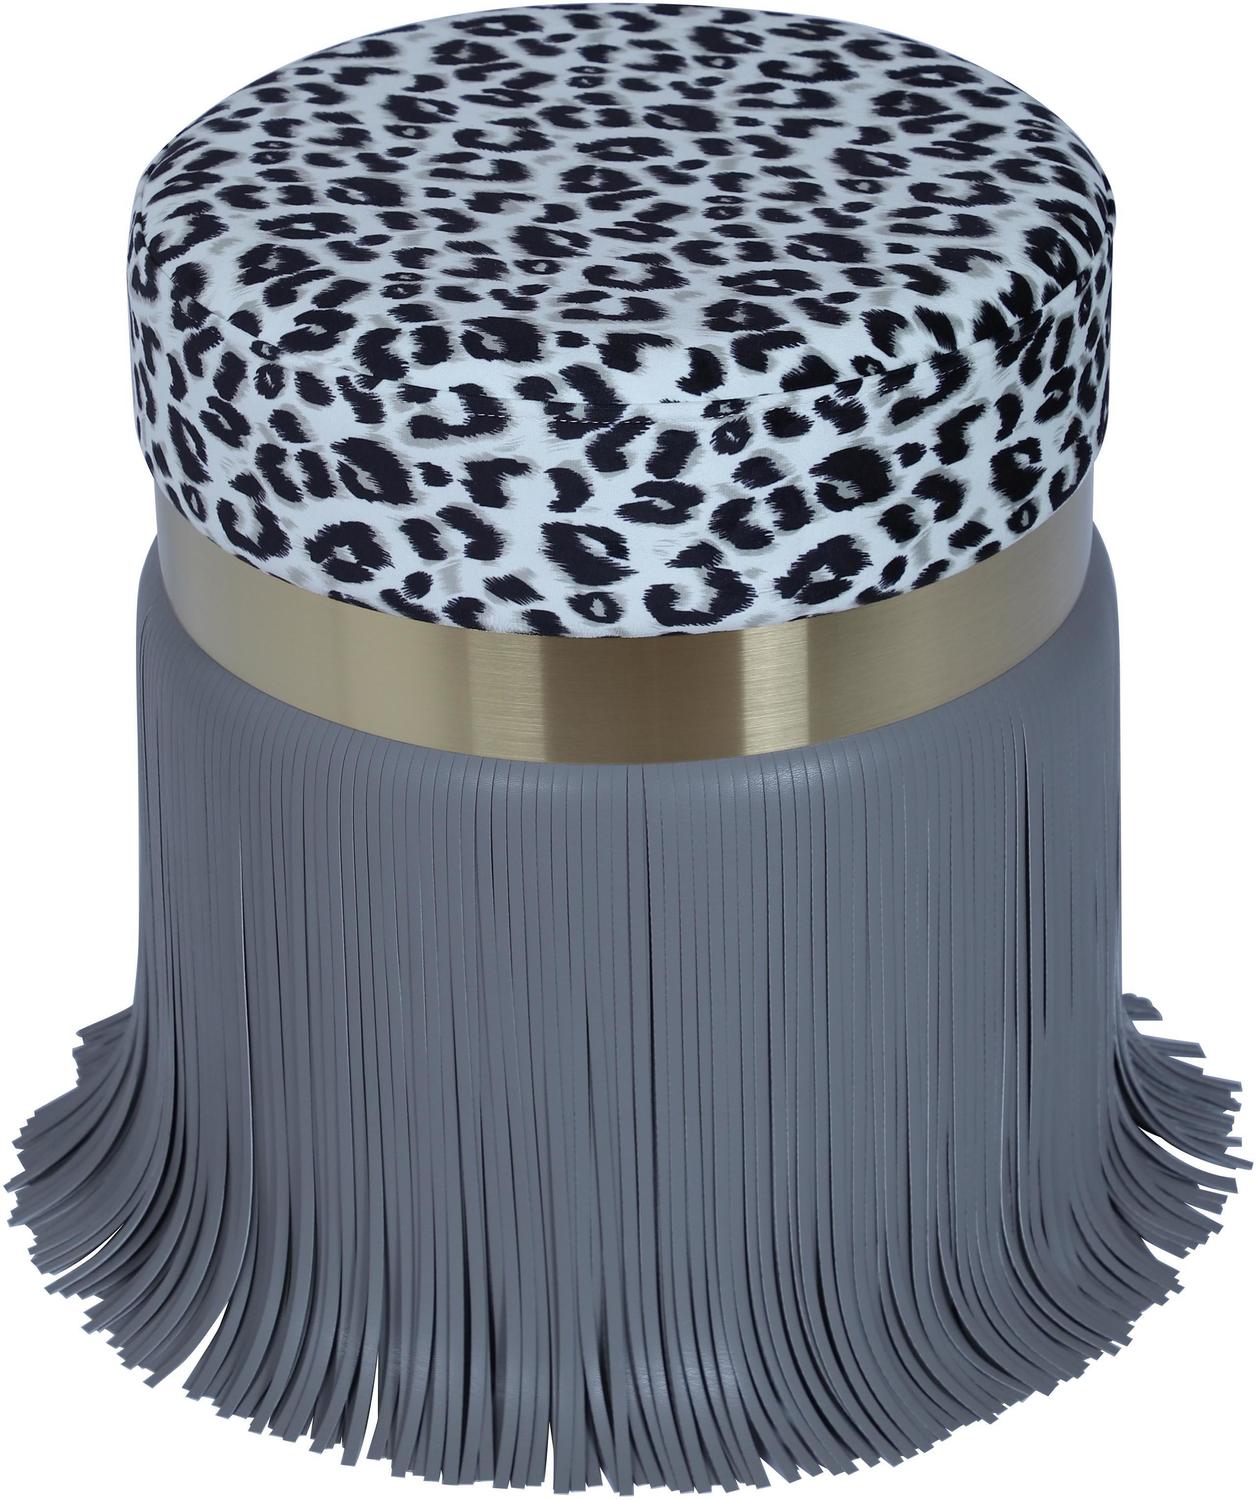 fabric wood accent chairs Tov Furniture Ottomans Grey,Leopard